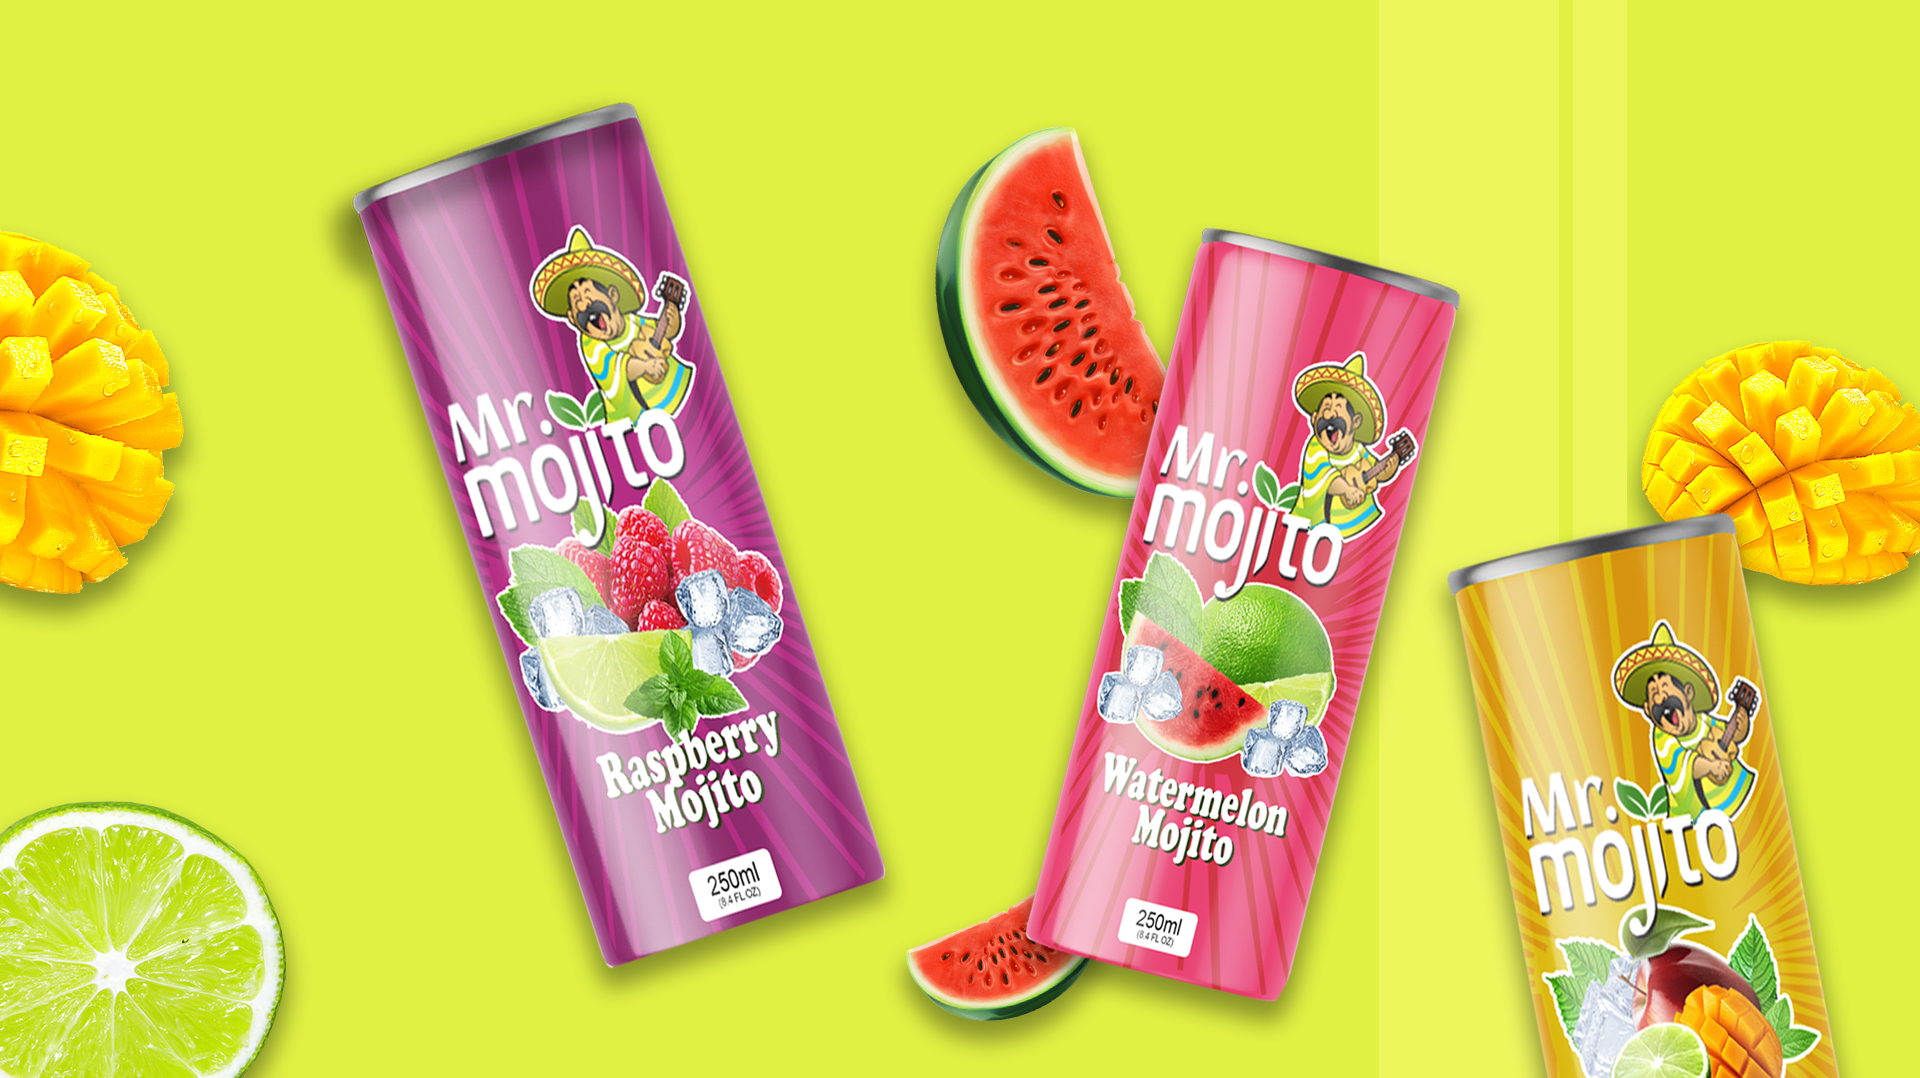 A Colorful advertisement for mr. mojito beverage with 2 different flavors strawberry and banana fruit and a character playing guitar, flanked by the london juice company's logo and mr mojito’s logo. Displayed with leaves and fruits on 2 different orange and green background colors.